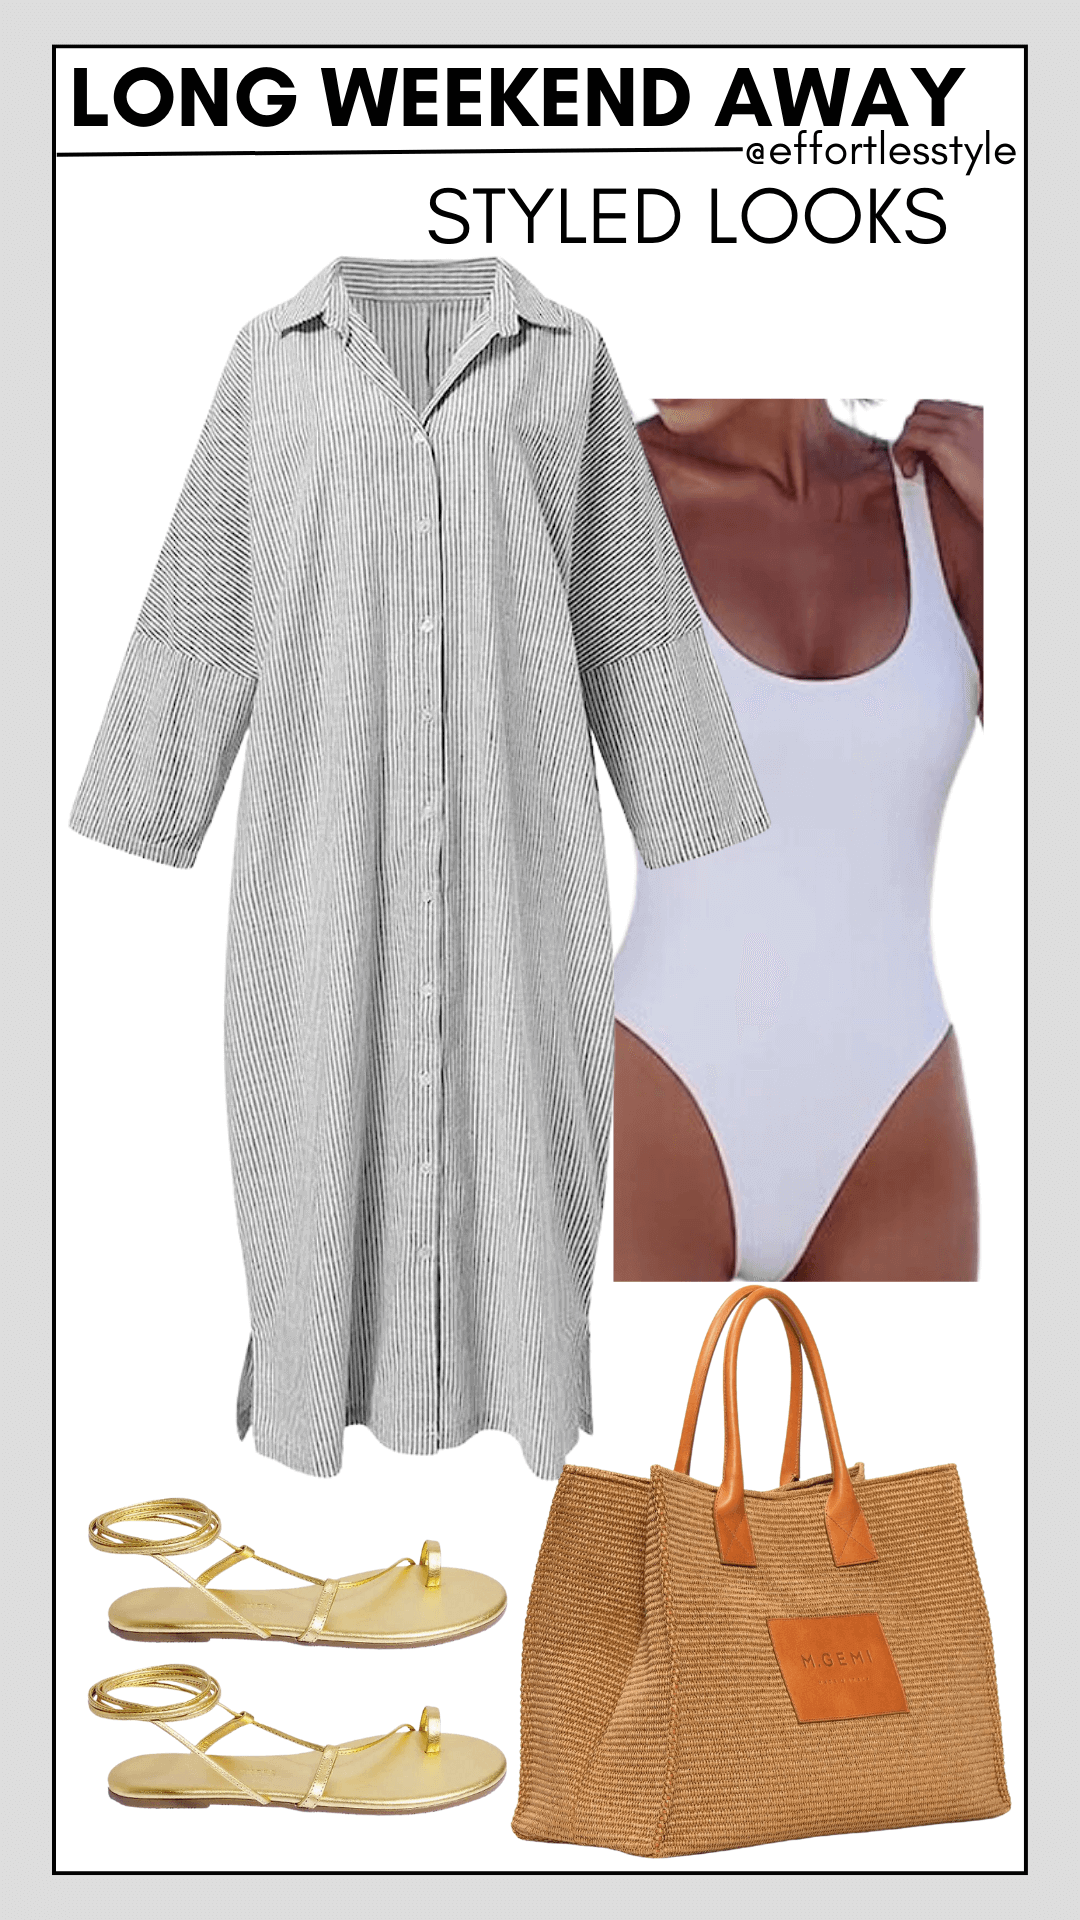 Long Weekend Travel Capsule Striped Maxi Shirtdress & One Piece Swimsuit how to wear a shirtdress as a cover up fun cover up ideas for the beach how to look stylish at the beach creative cover up ideas for the pool the best one piece bathing suit affordable one piece bathing suit for summer how to wear a shirtdress as a cover up how to make the most of your suitcase items on a trip